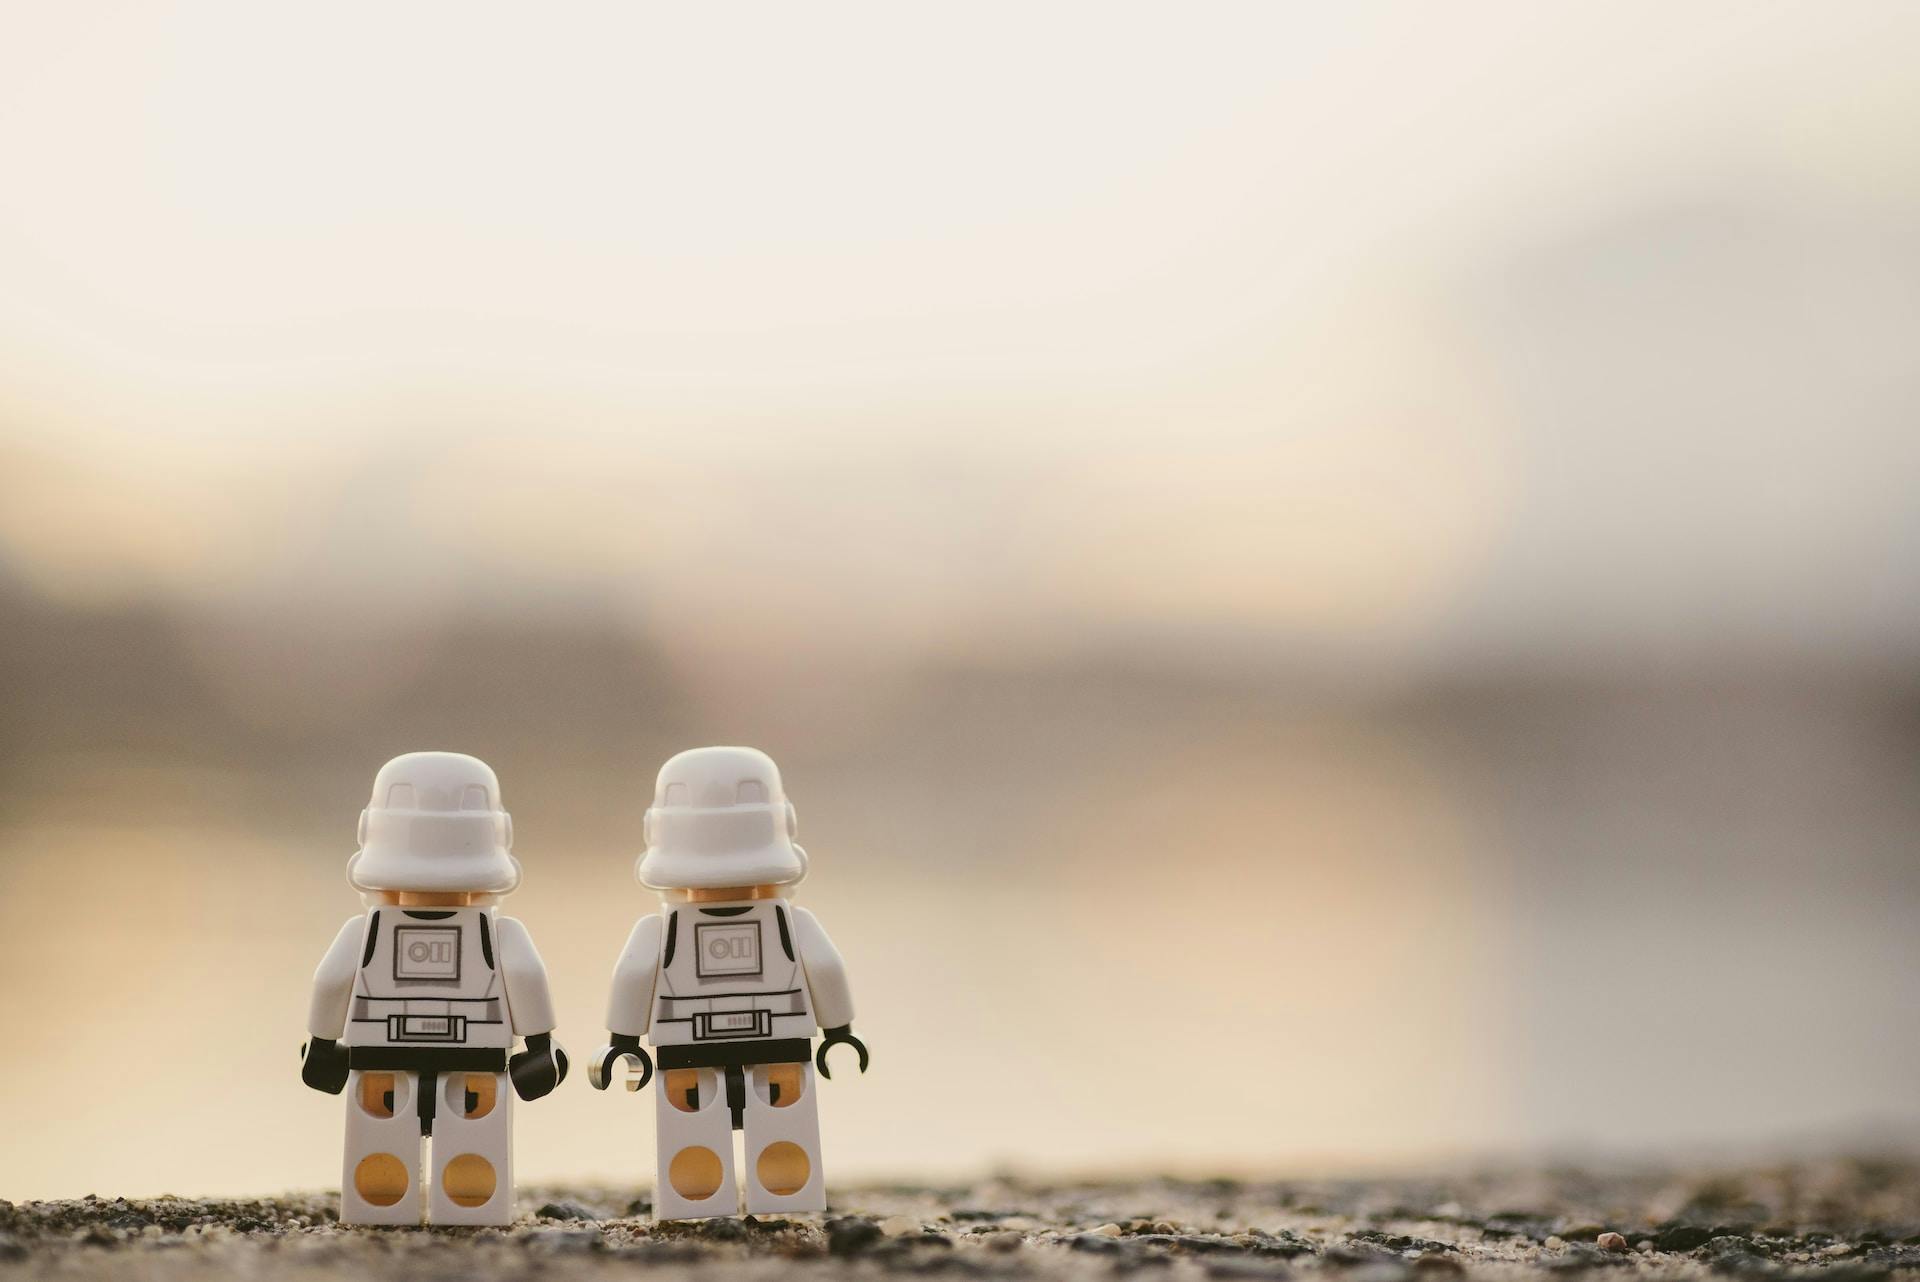 Two Lego Storm Troopers looking out across a vast empty landscape